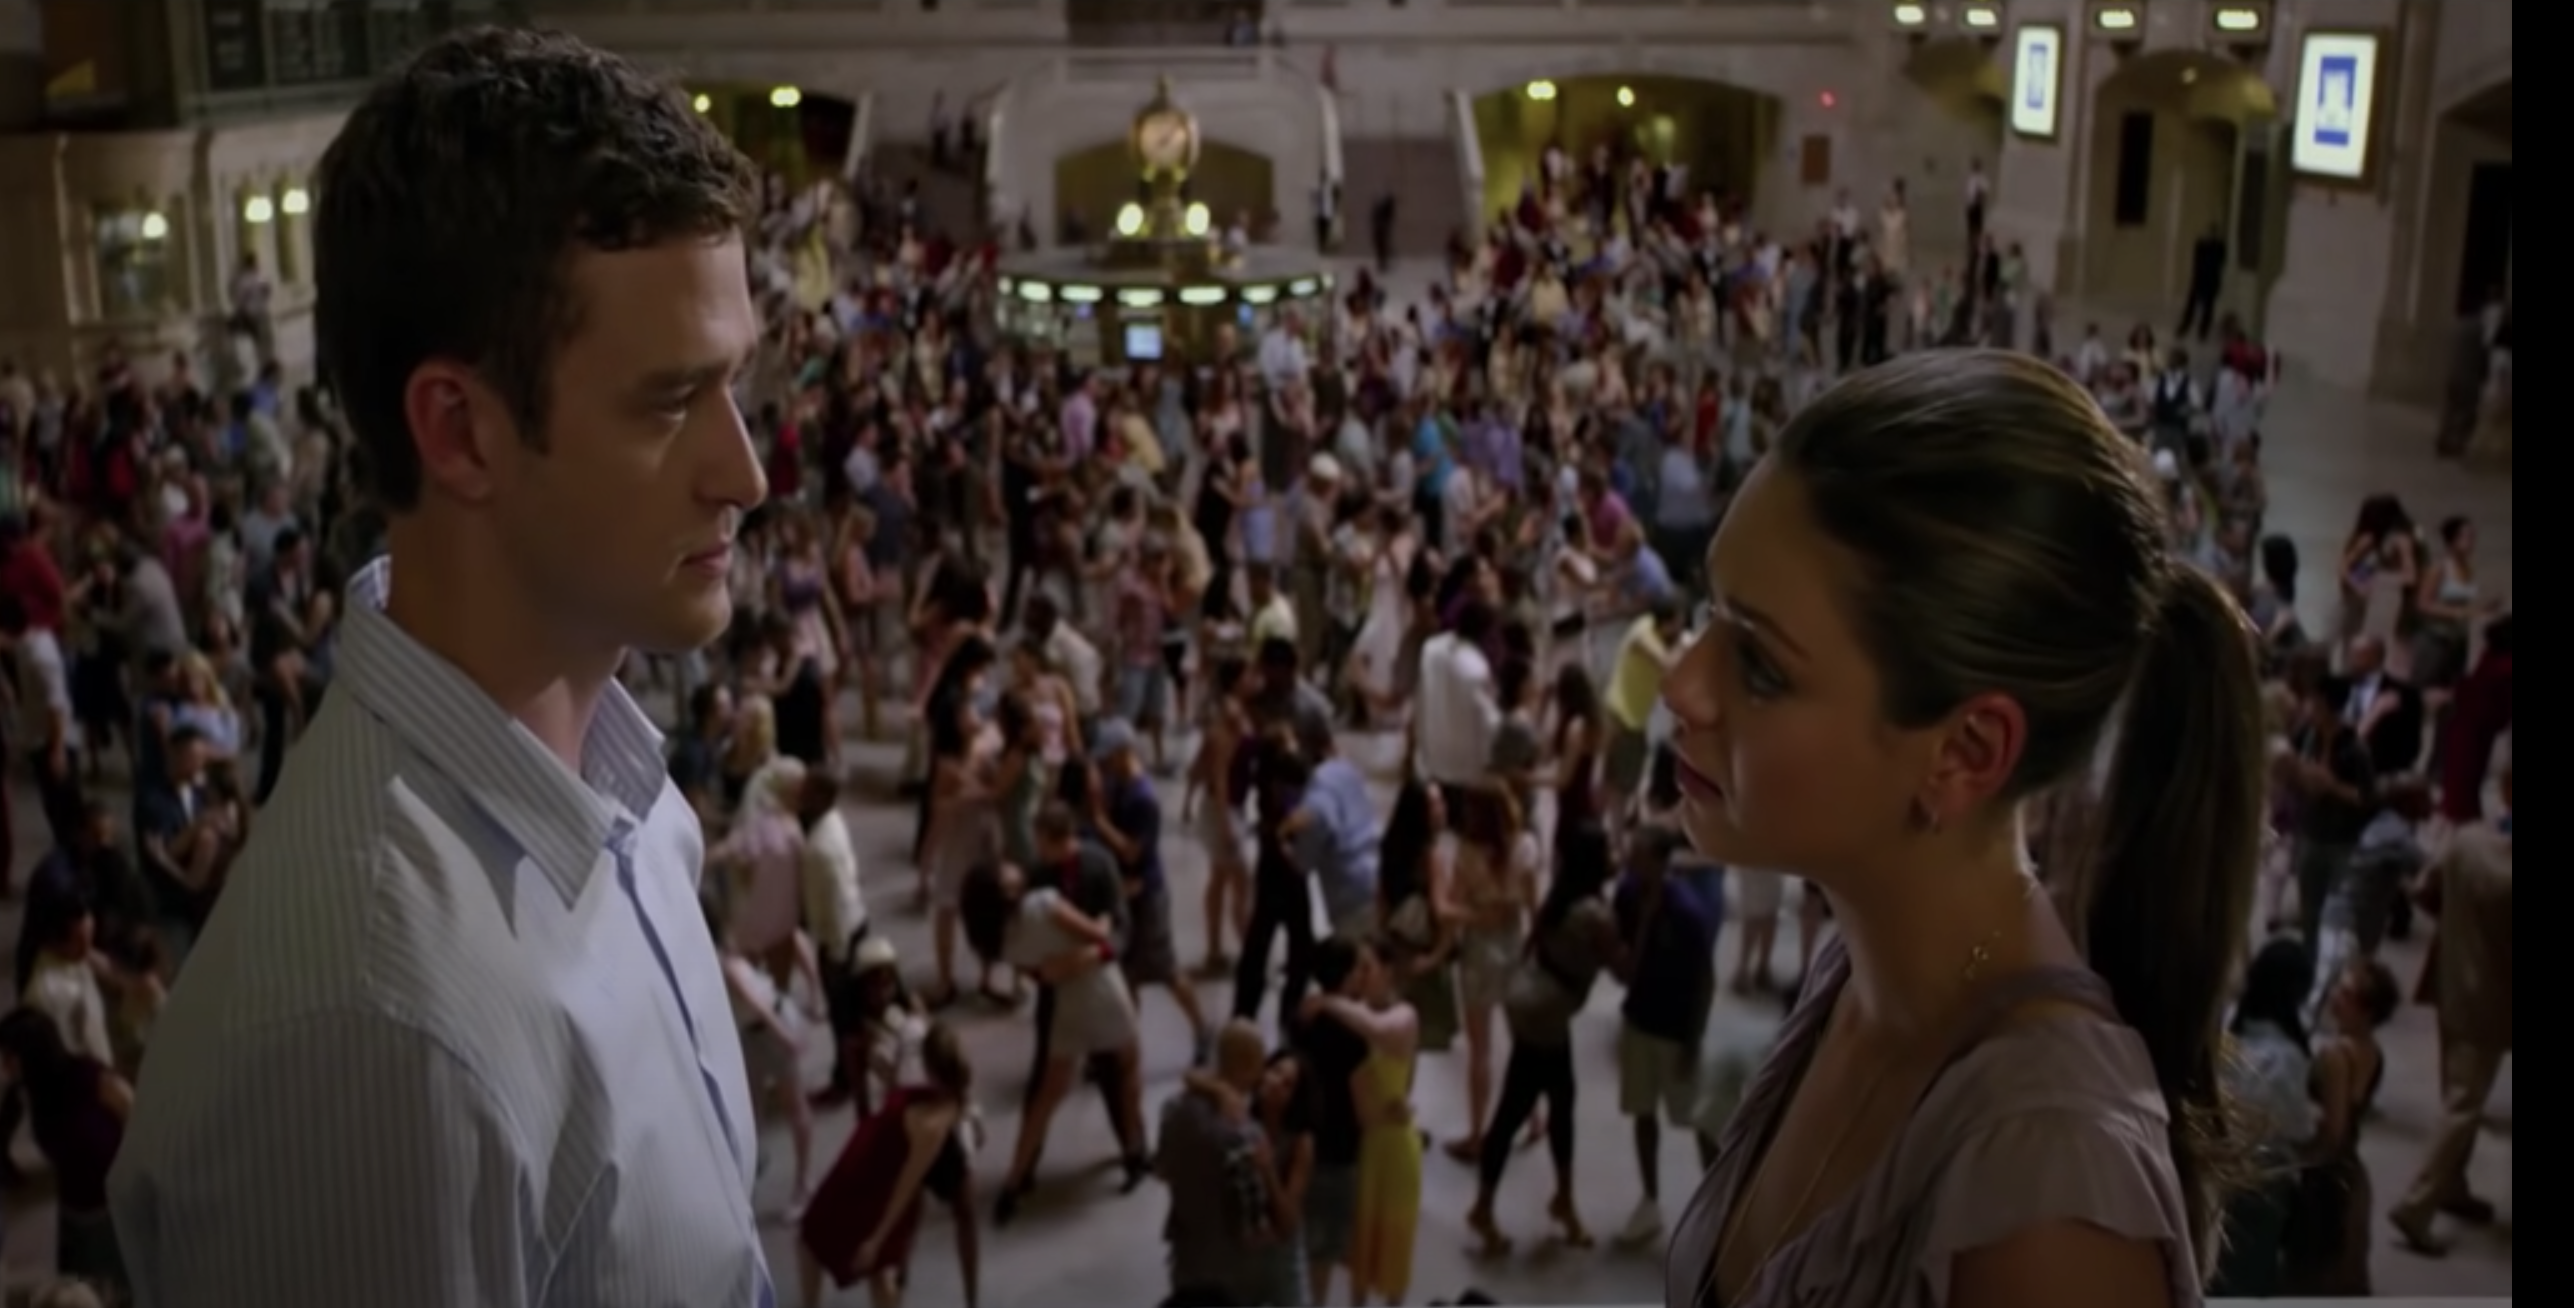 Justin Timberlake and Mila Kunis facing each other in front of a busy crowd in Friends with Benefits